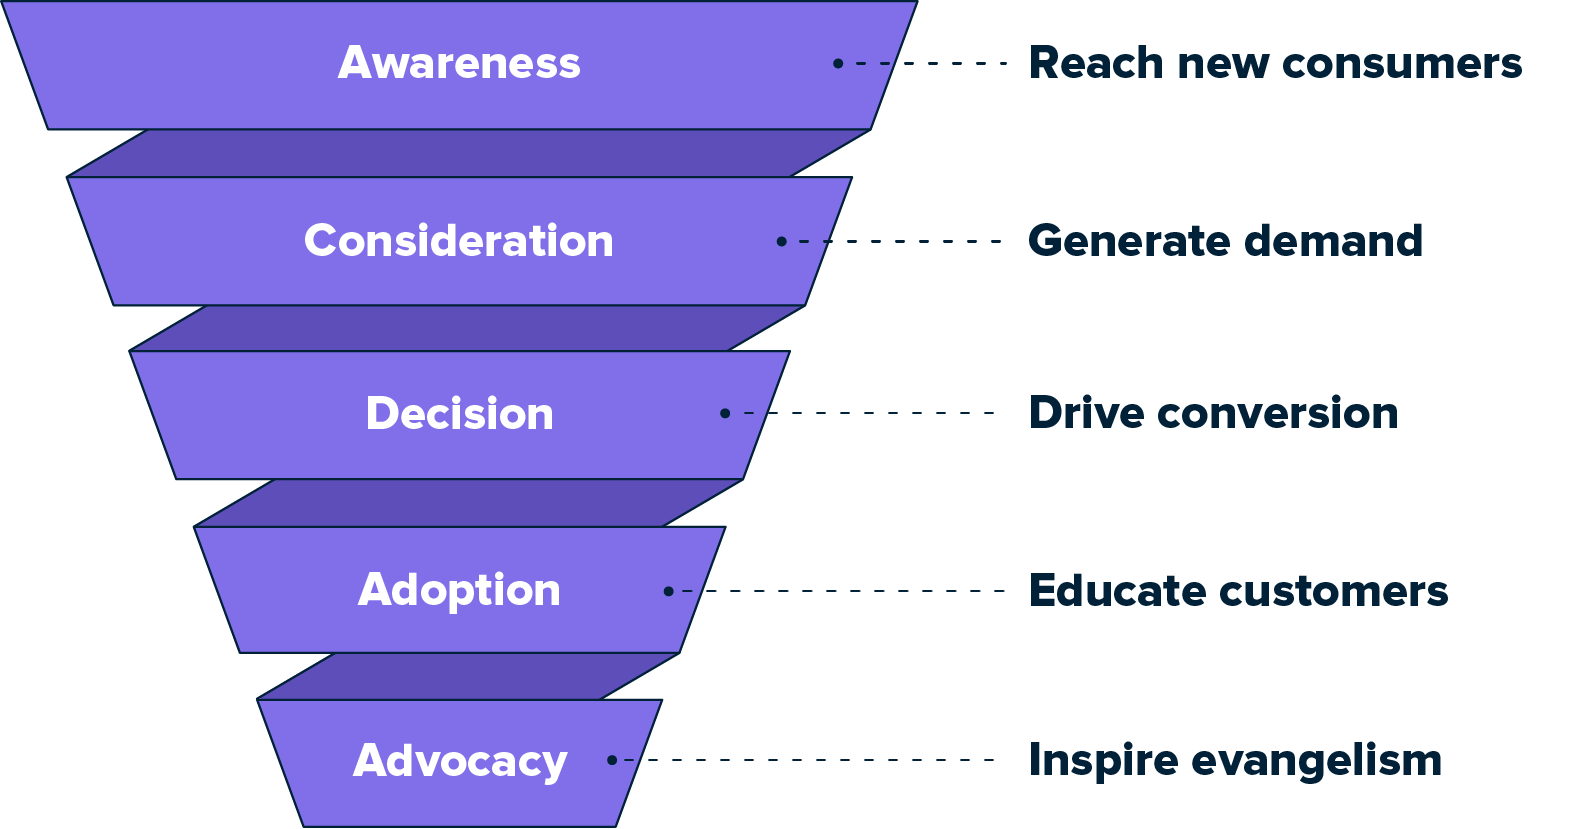 A graphic listing the stages of the marketing funnel with example goals.